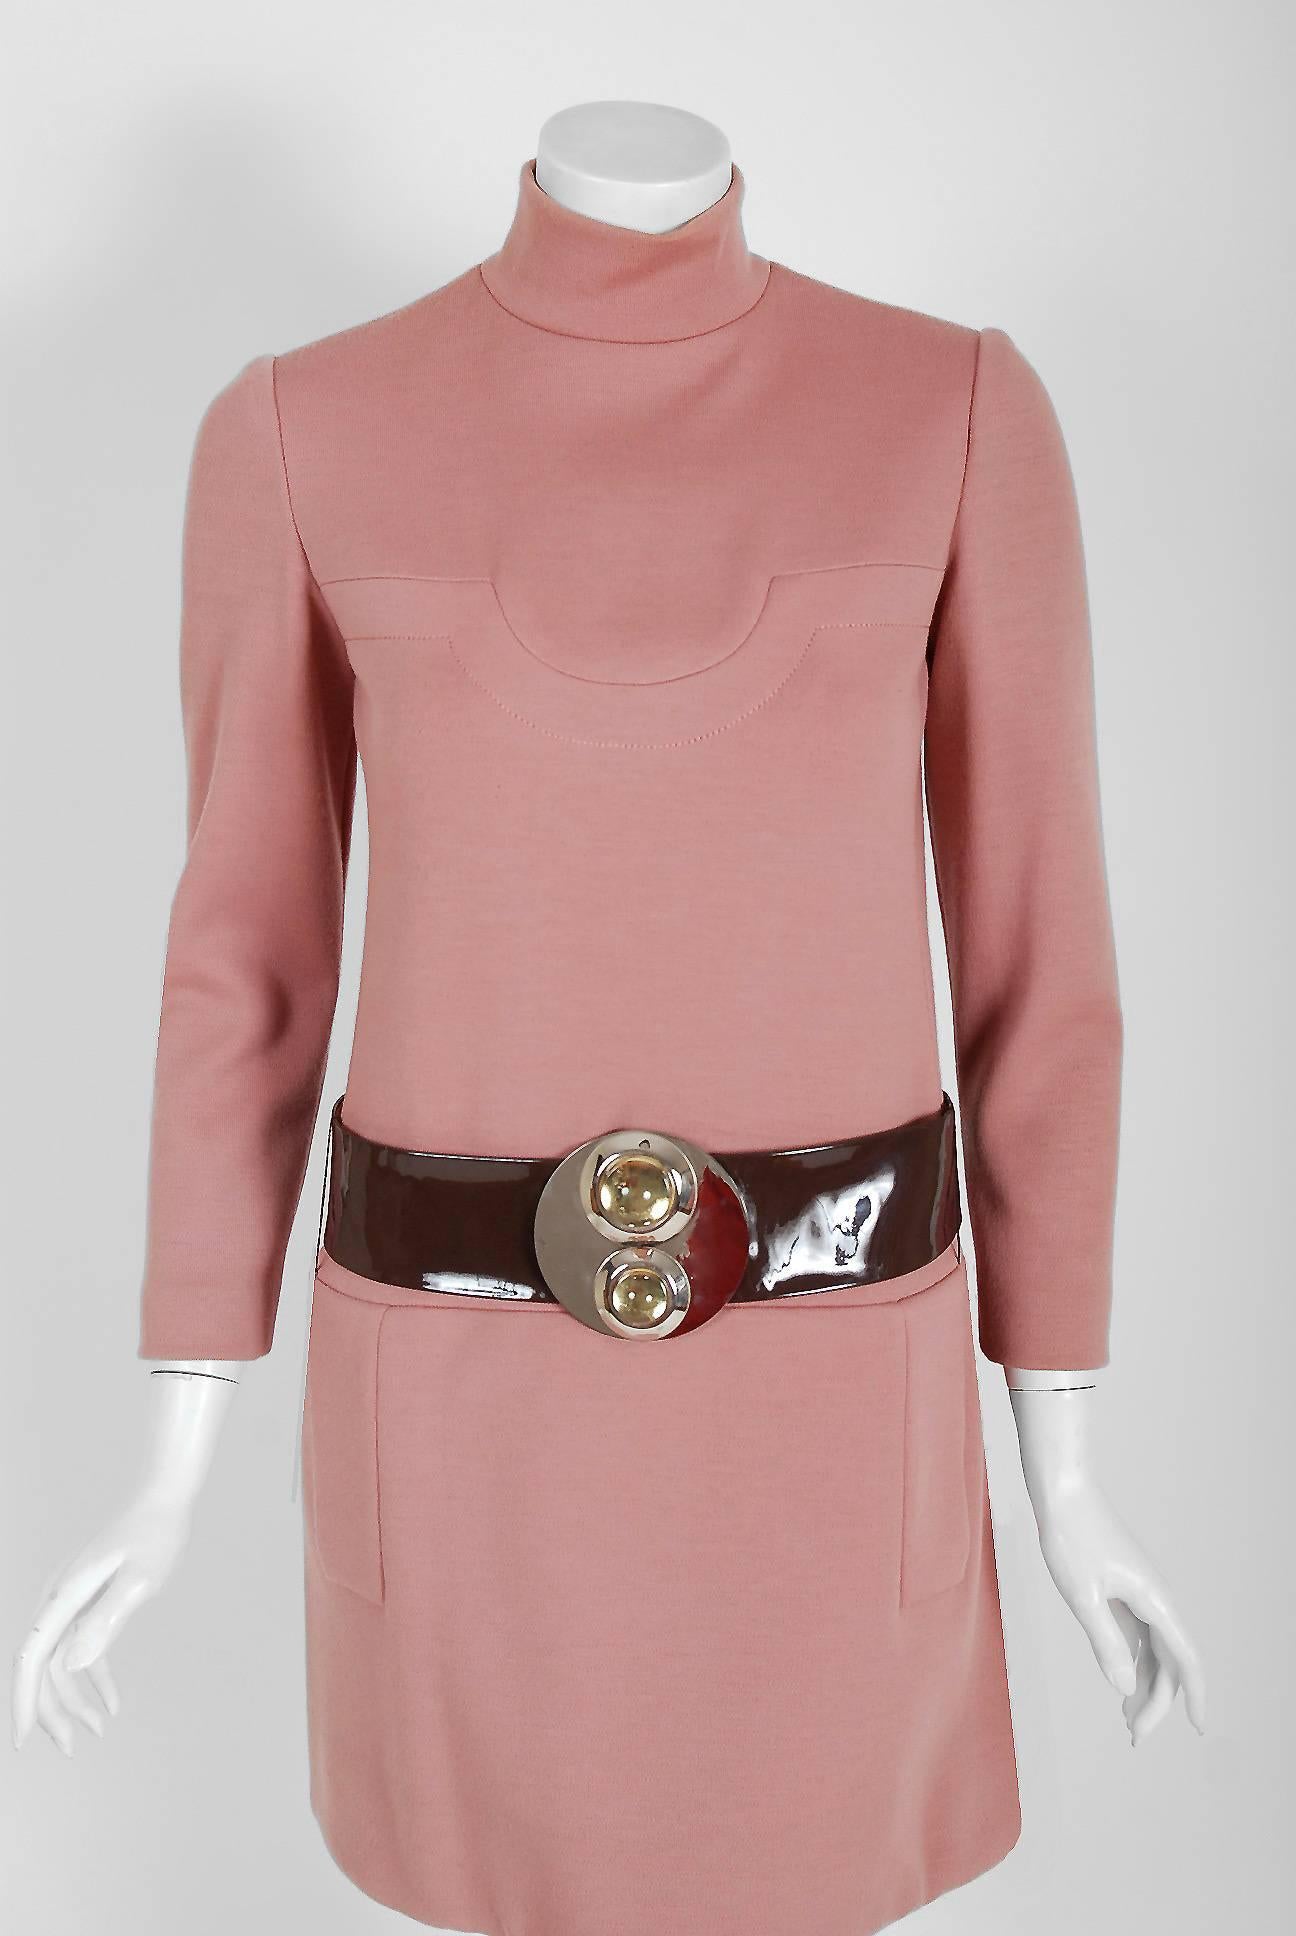 Spectacular Pierre Cardin mauve-pink wool mod dress from his 1967 fall/winter collection. In 1951 Cardin opened his own couture house and by 1957, he started a ready-to-wear line; a bold move for a French couturier at the time. The look most